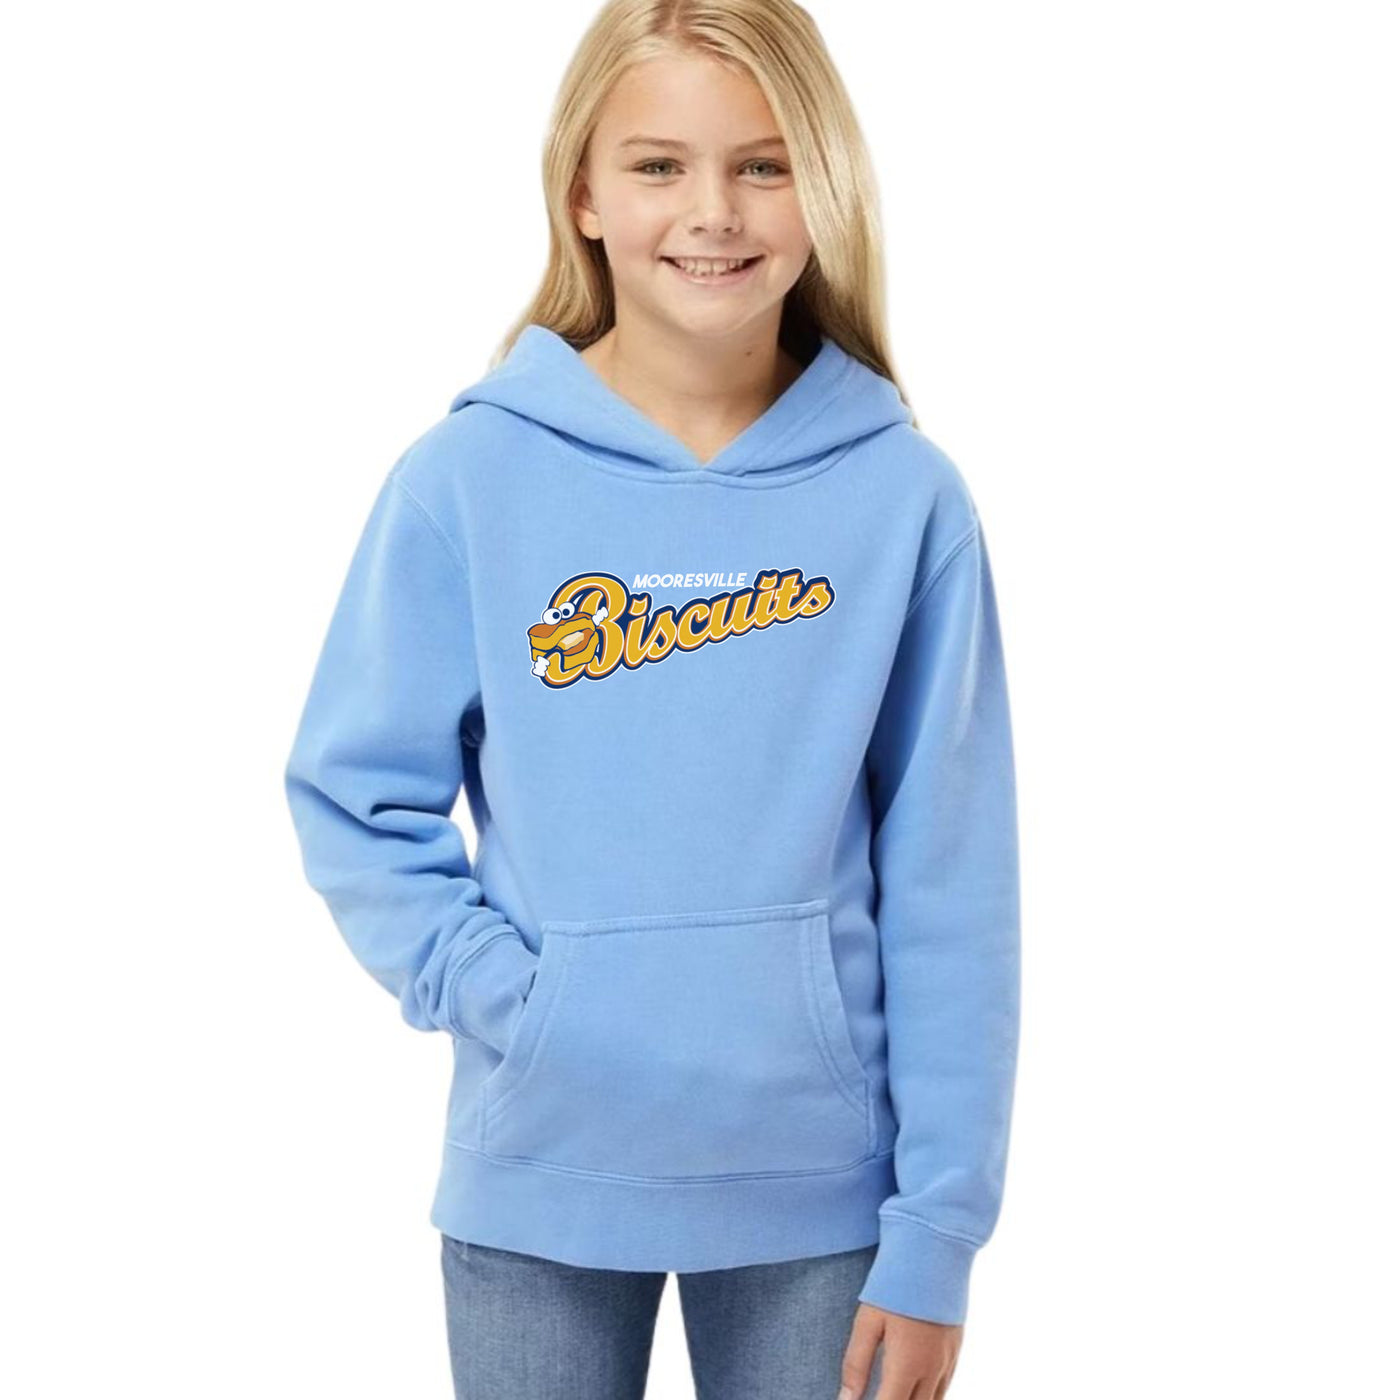 Mooresville Biscuits Youth Hoodie